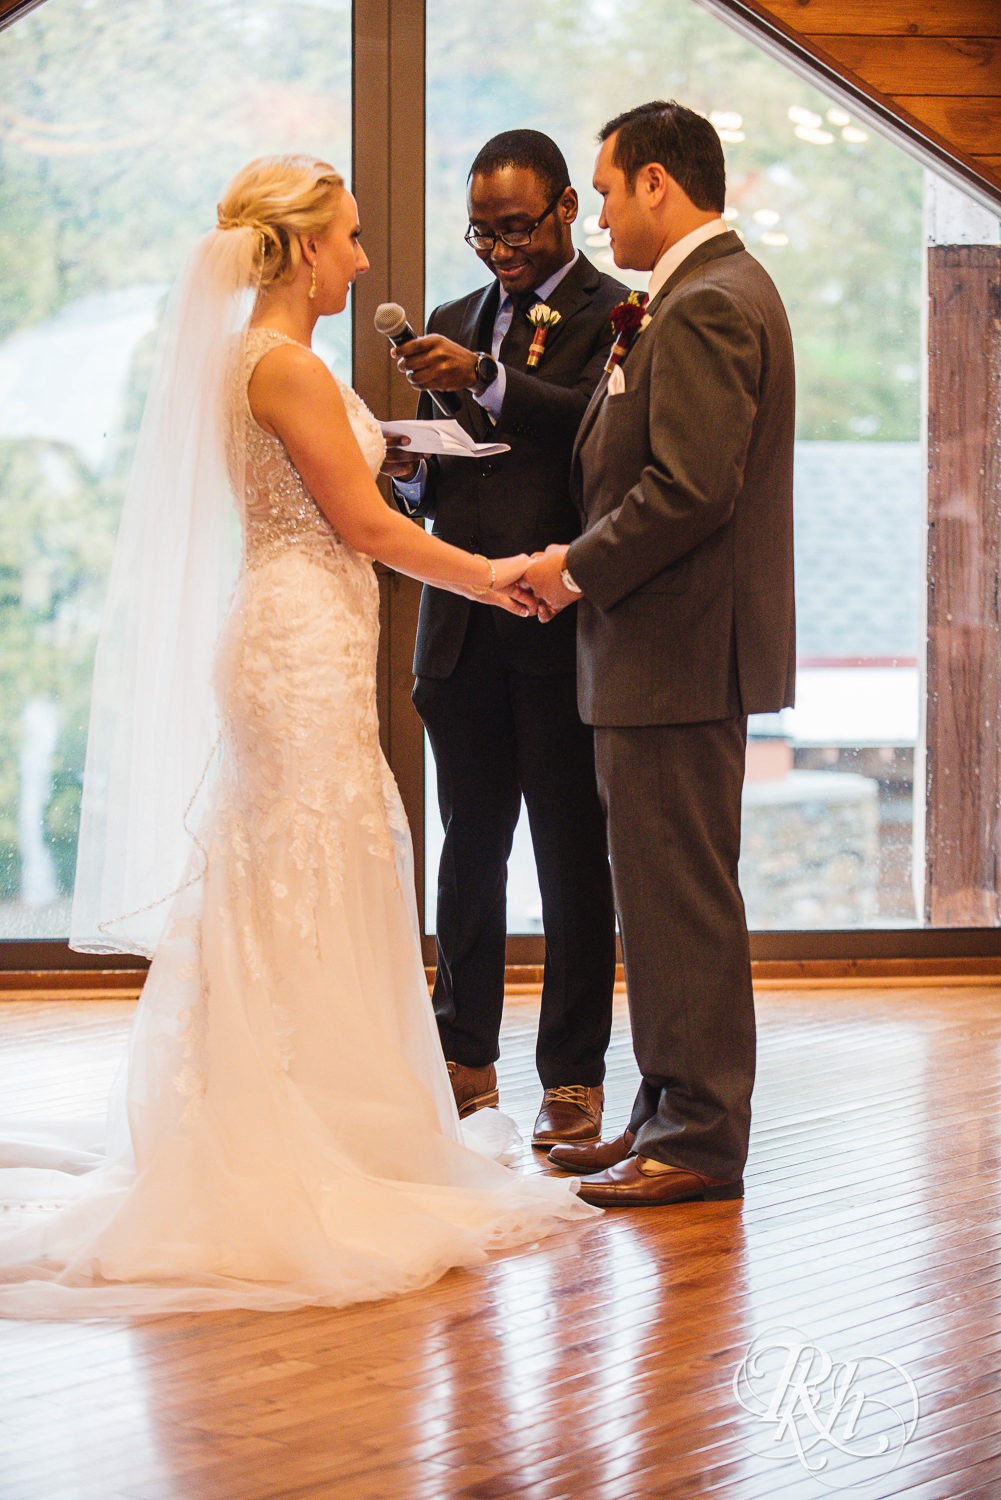 Bride and groom read vows at Green Acres Event Center barn wedding ceremony in Eden Prairie, Minnesota.